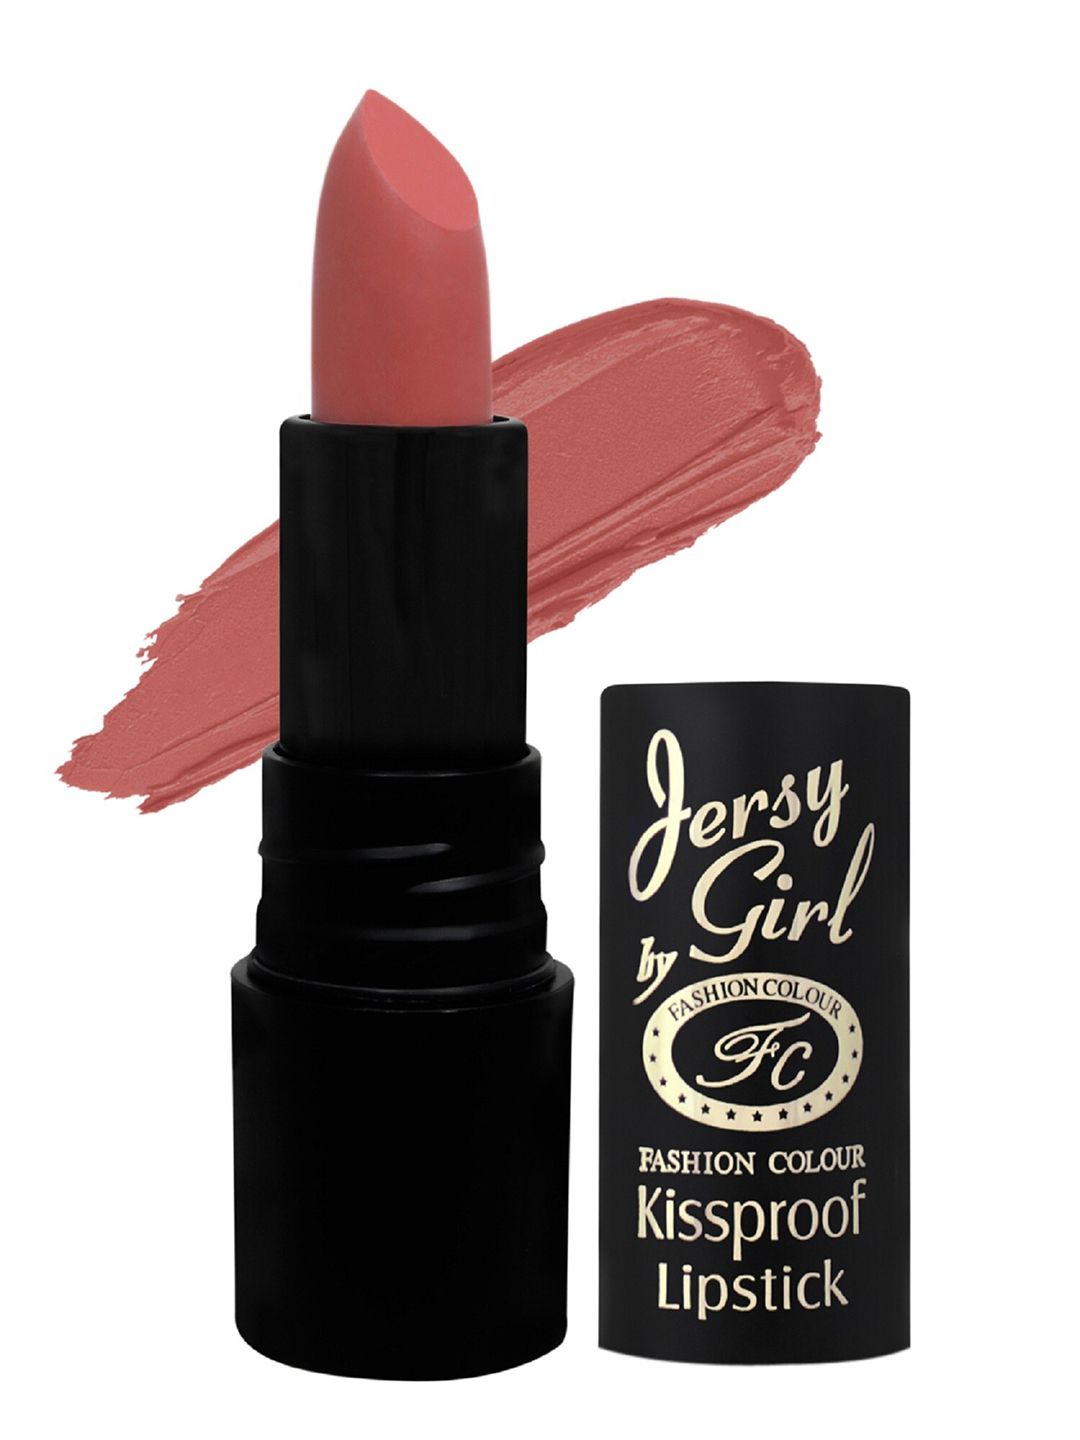 Fashion Colour Jersy Girl Kiss Proof Lipstick - Caramel 24 3.8 gm Price in India